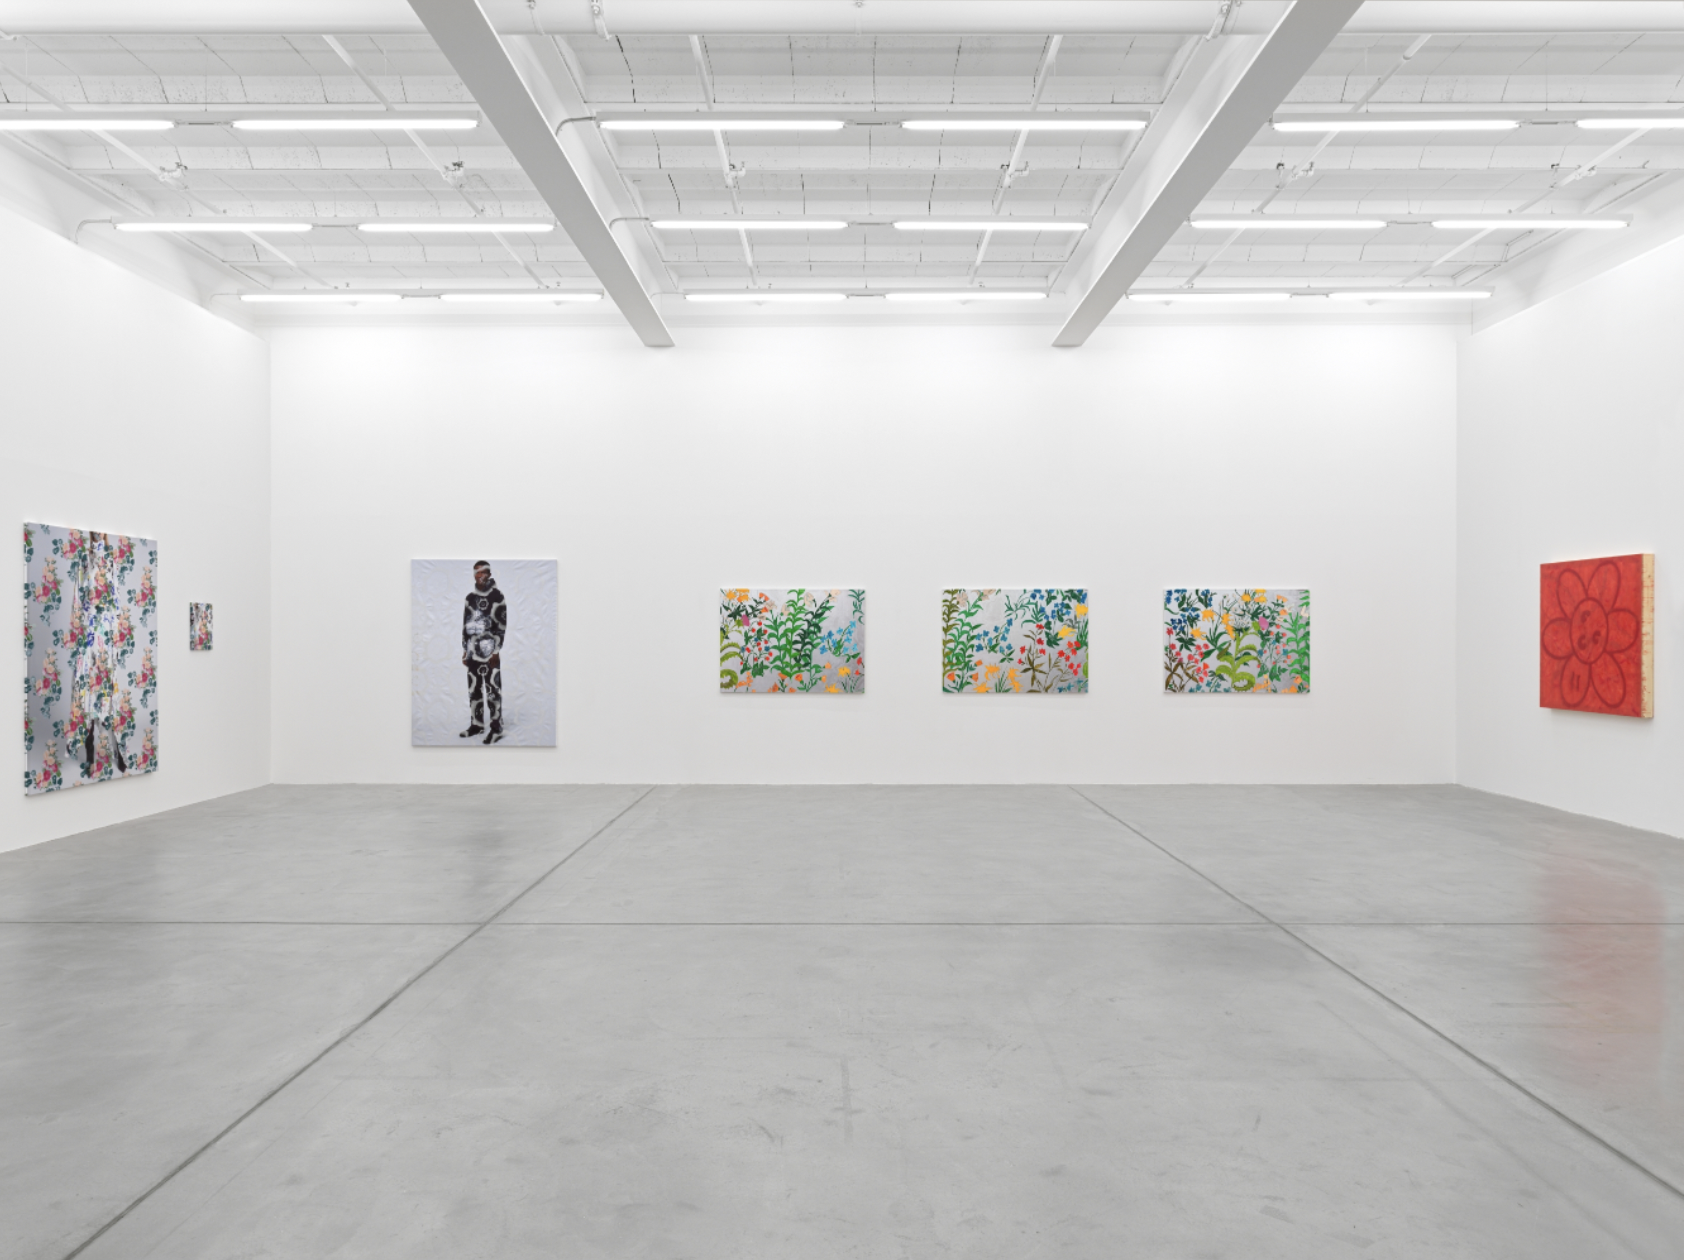 Installation view with works by Tobias Kaspar, Laura Langer, and Mitchell Anderson